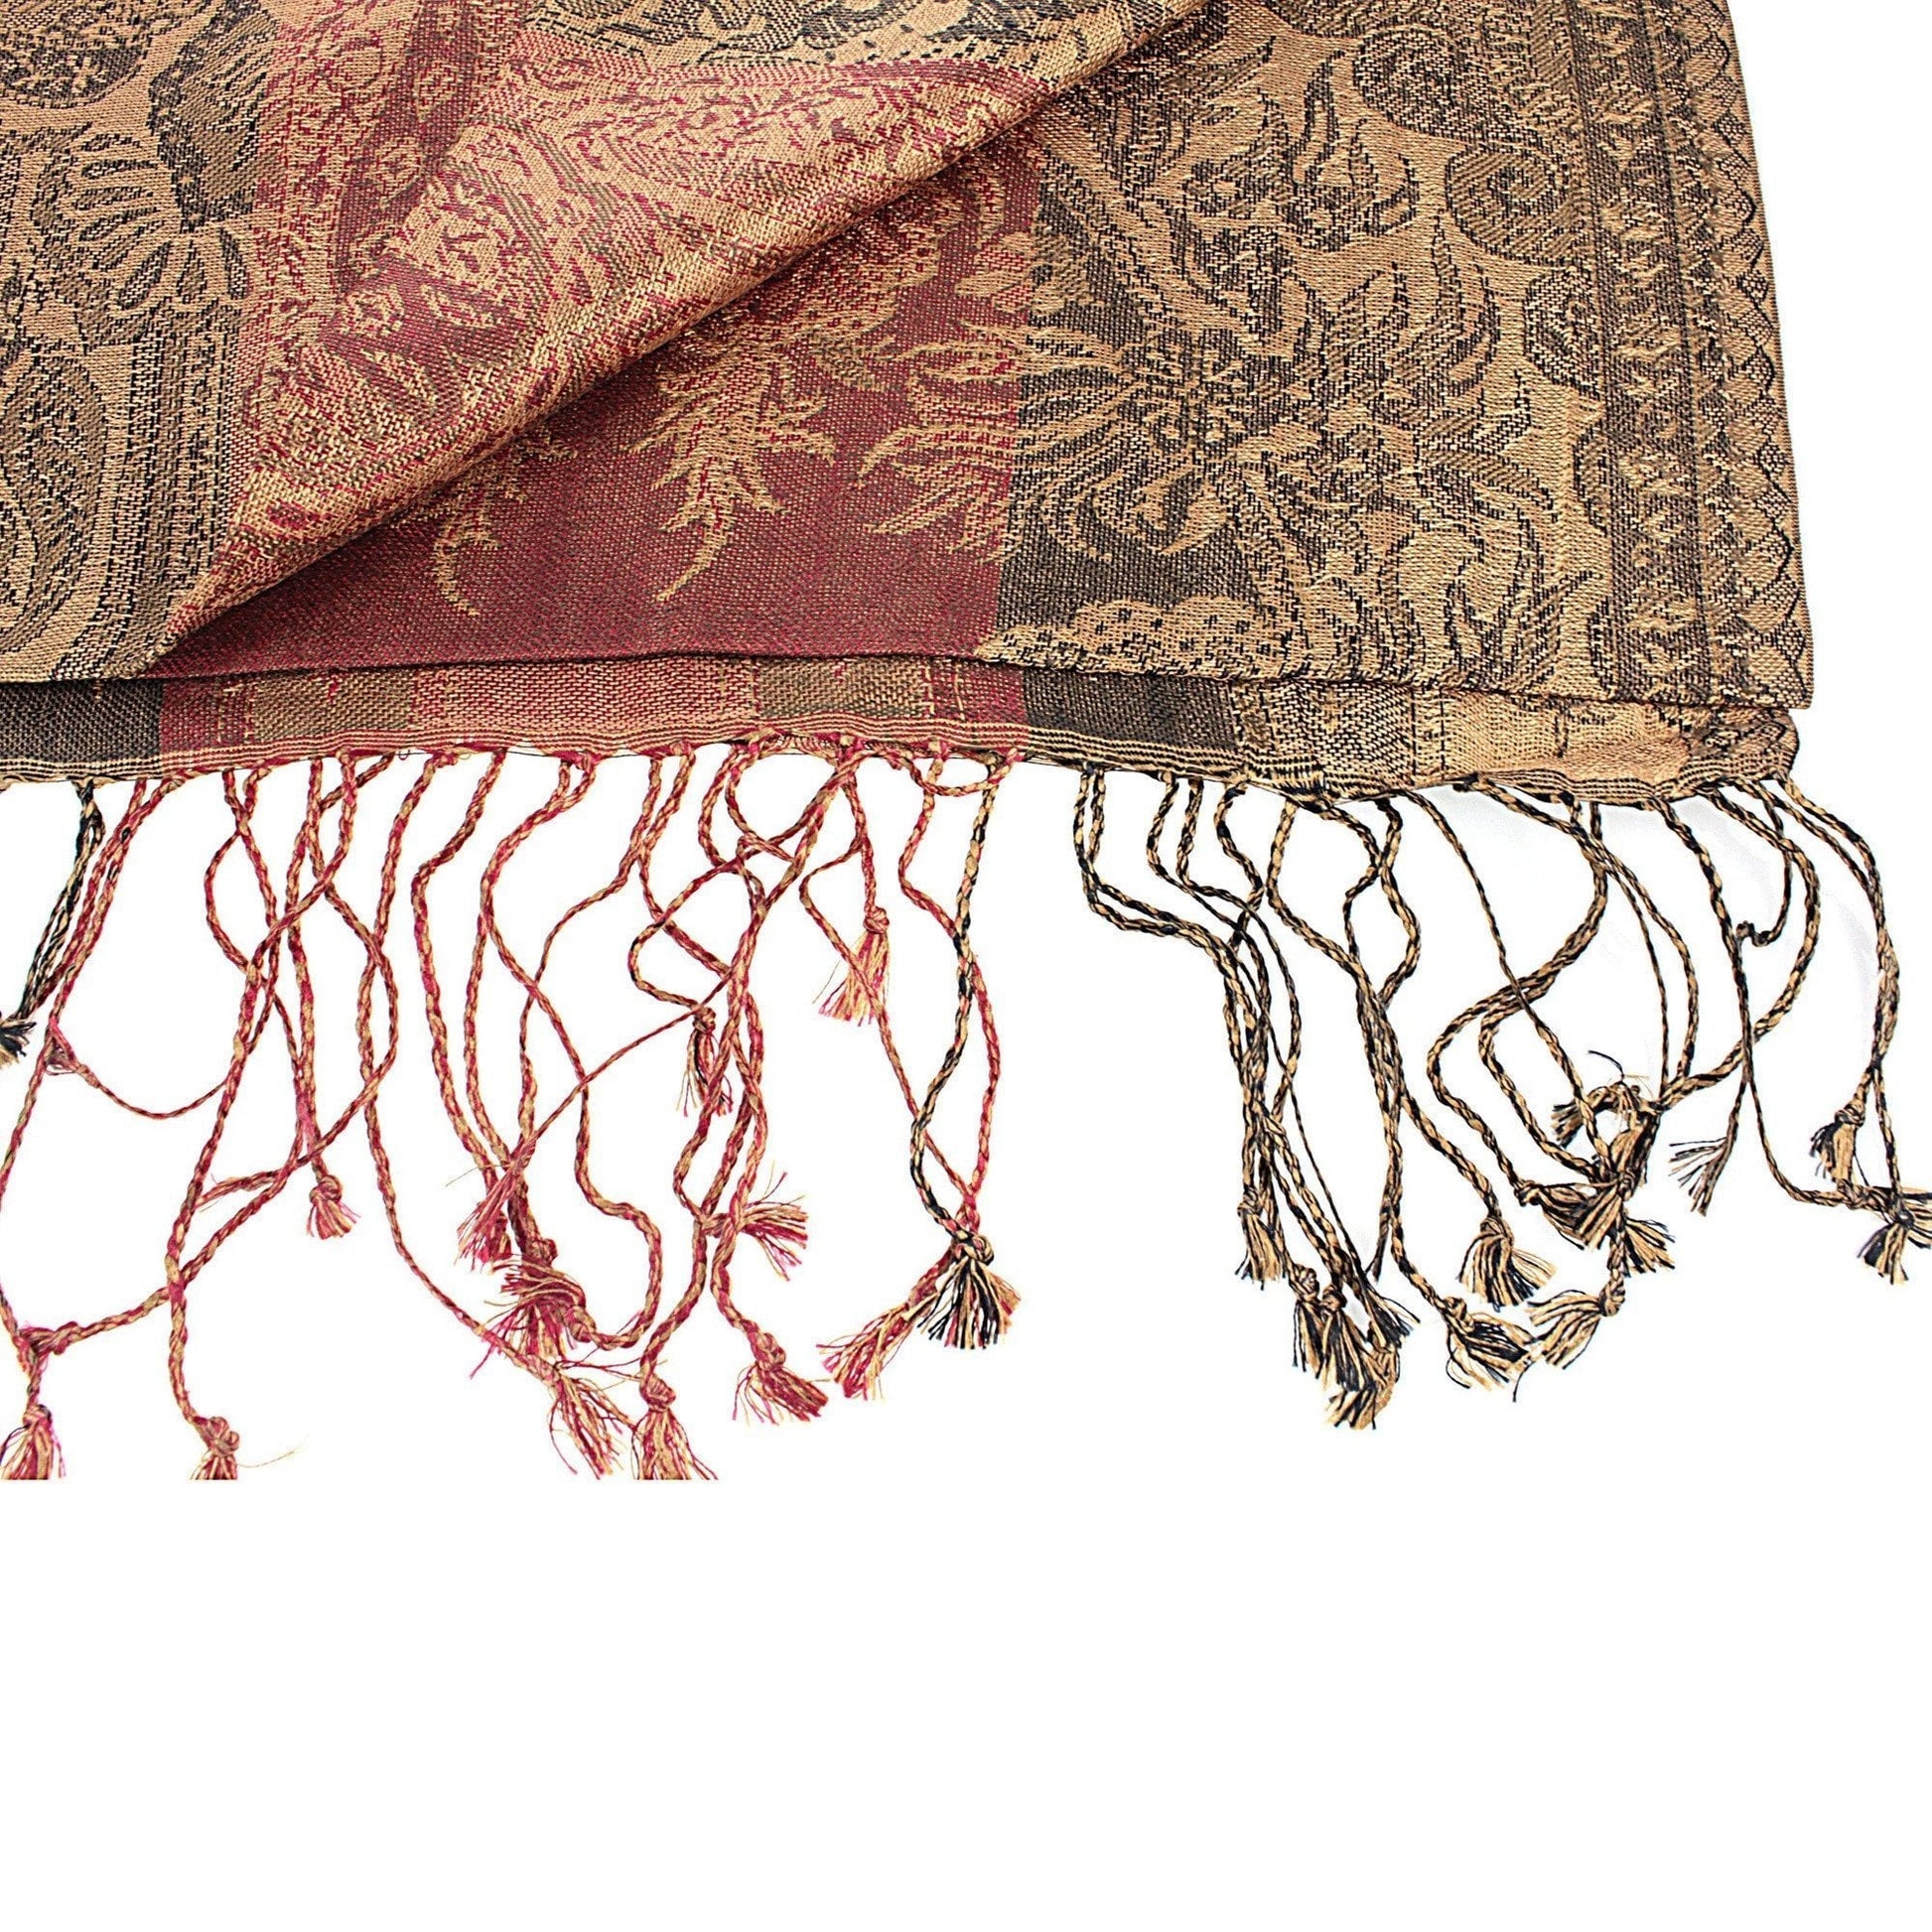 Artisanal Bags Antique Scarf A799449